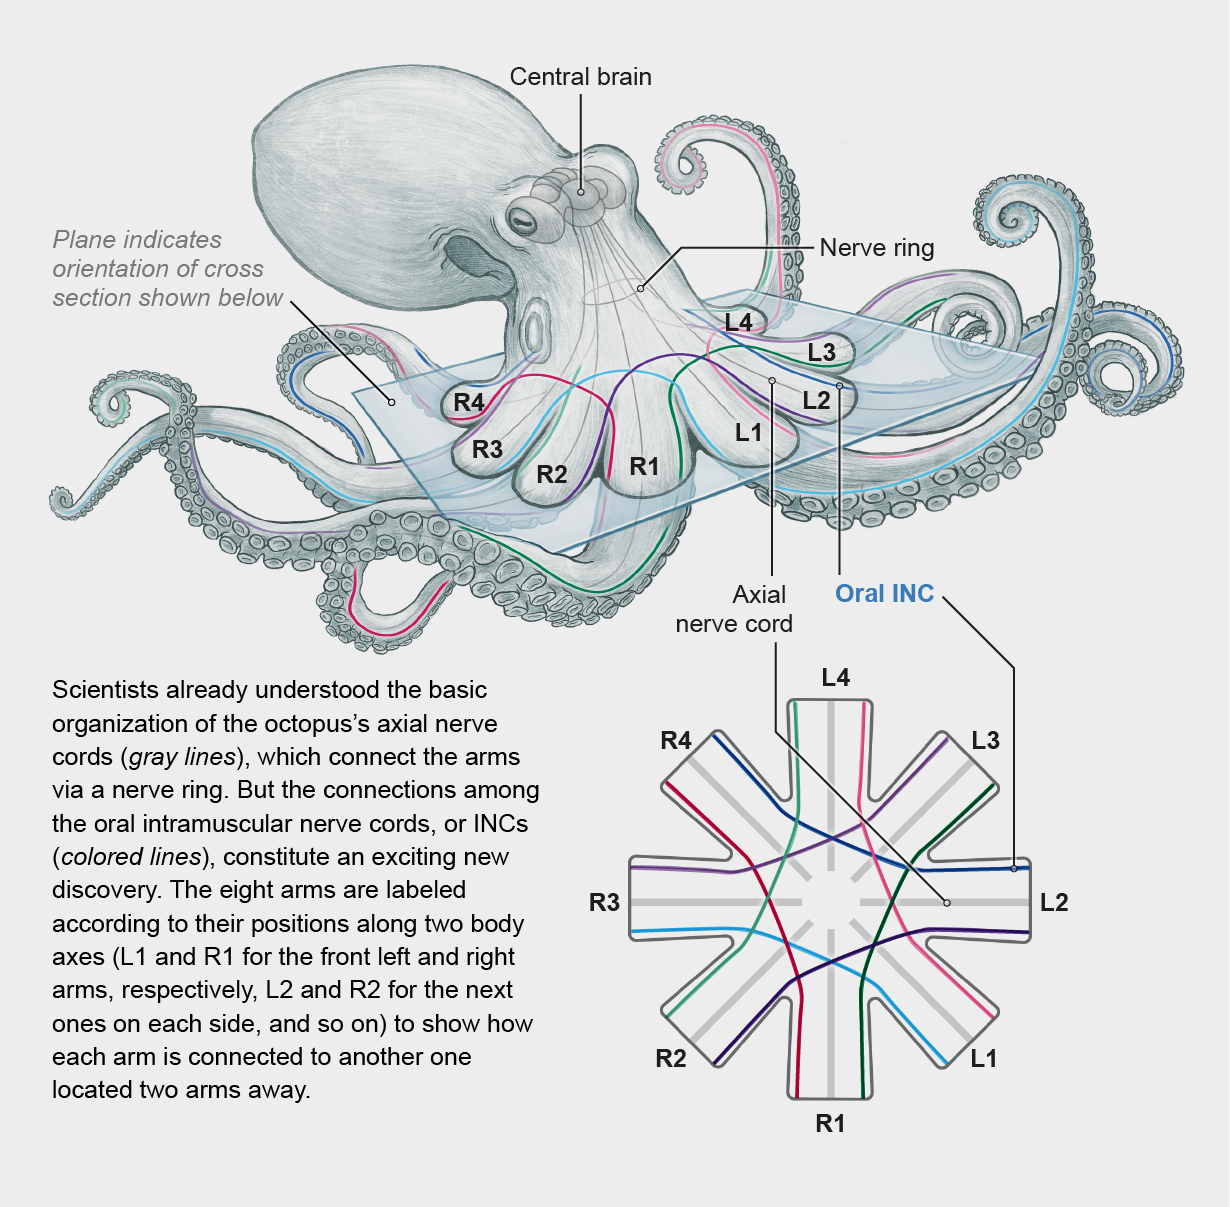 How Octopus Arms Bypass the Brain - Scientific American